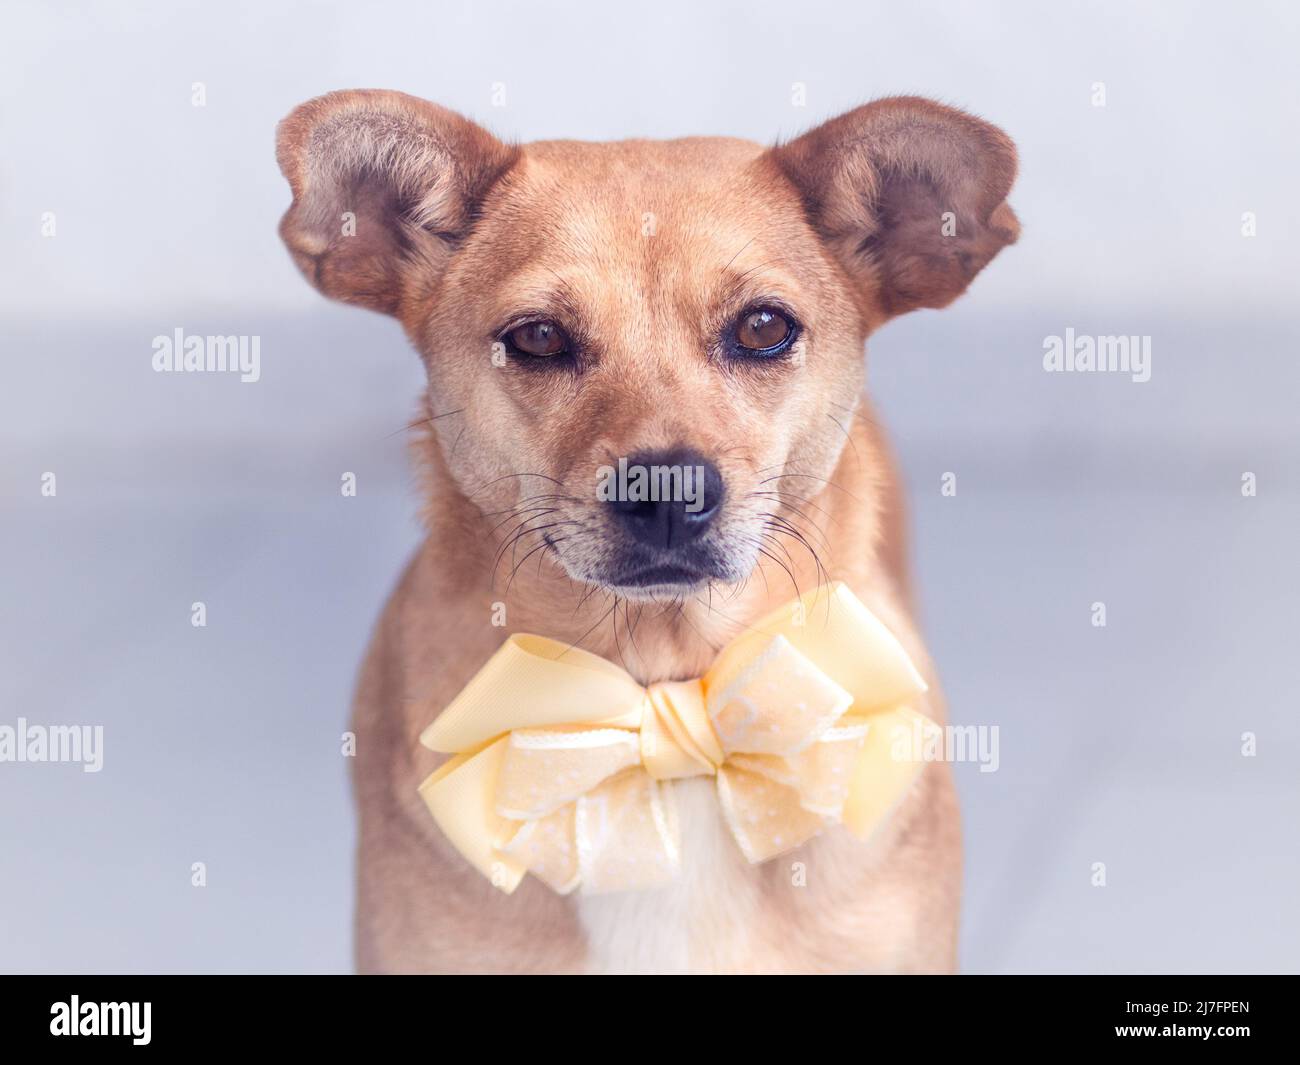 ortrait of a beautiful female mixed-breed dog wearing a big yellow bow tie around the neck and looking at the camera with tender eyes Stock Photo